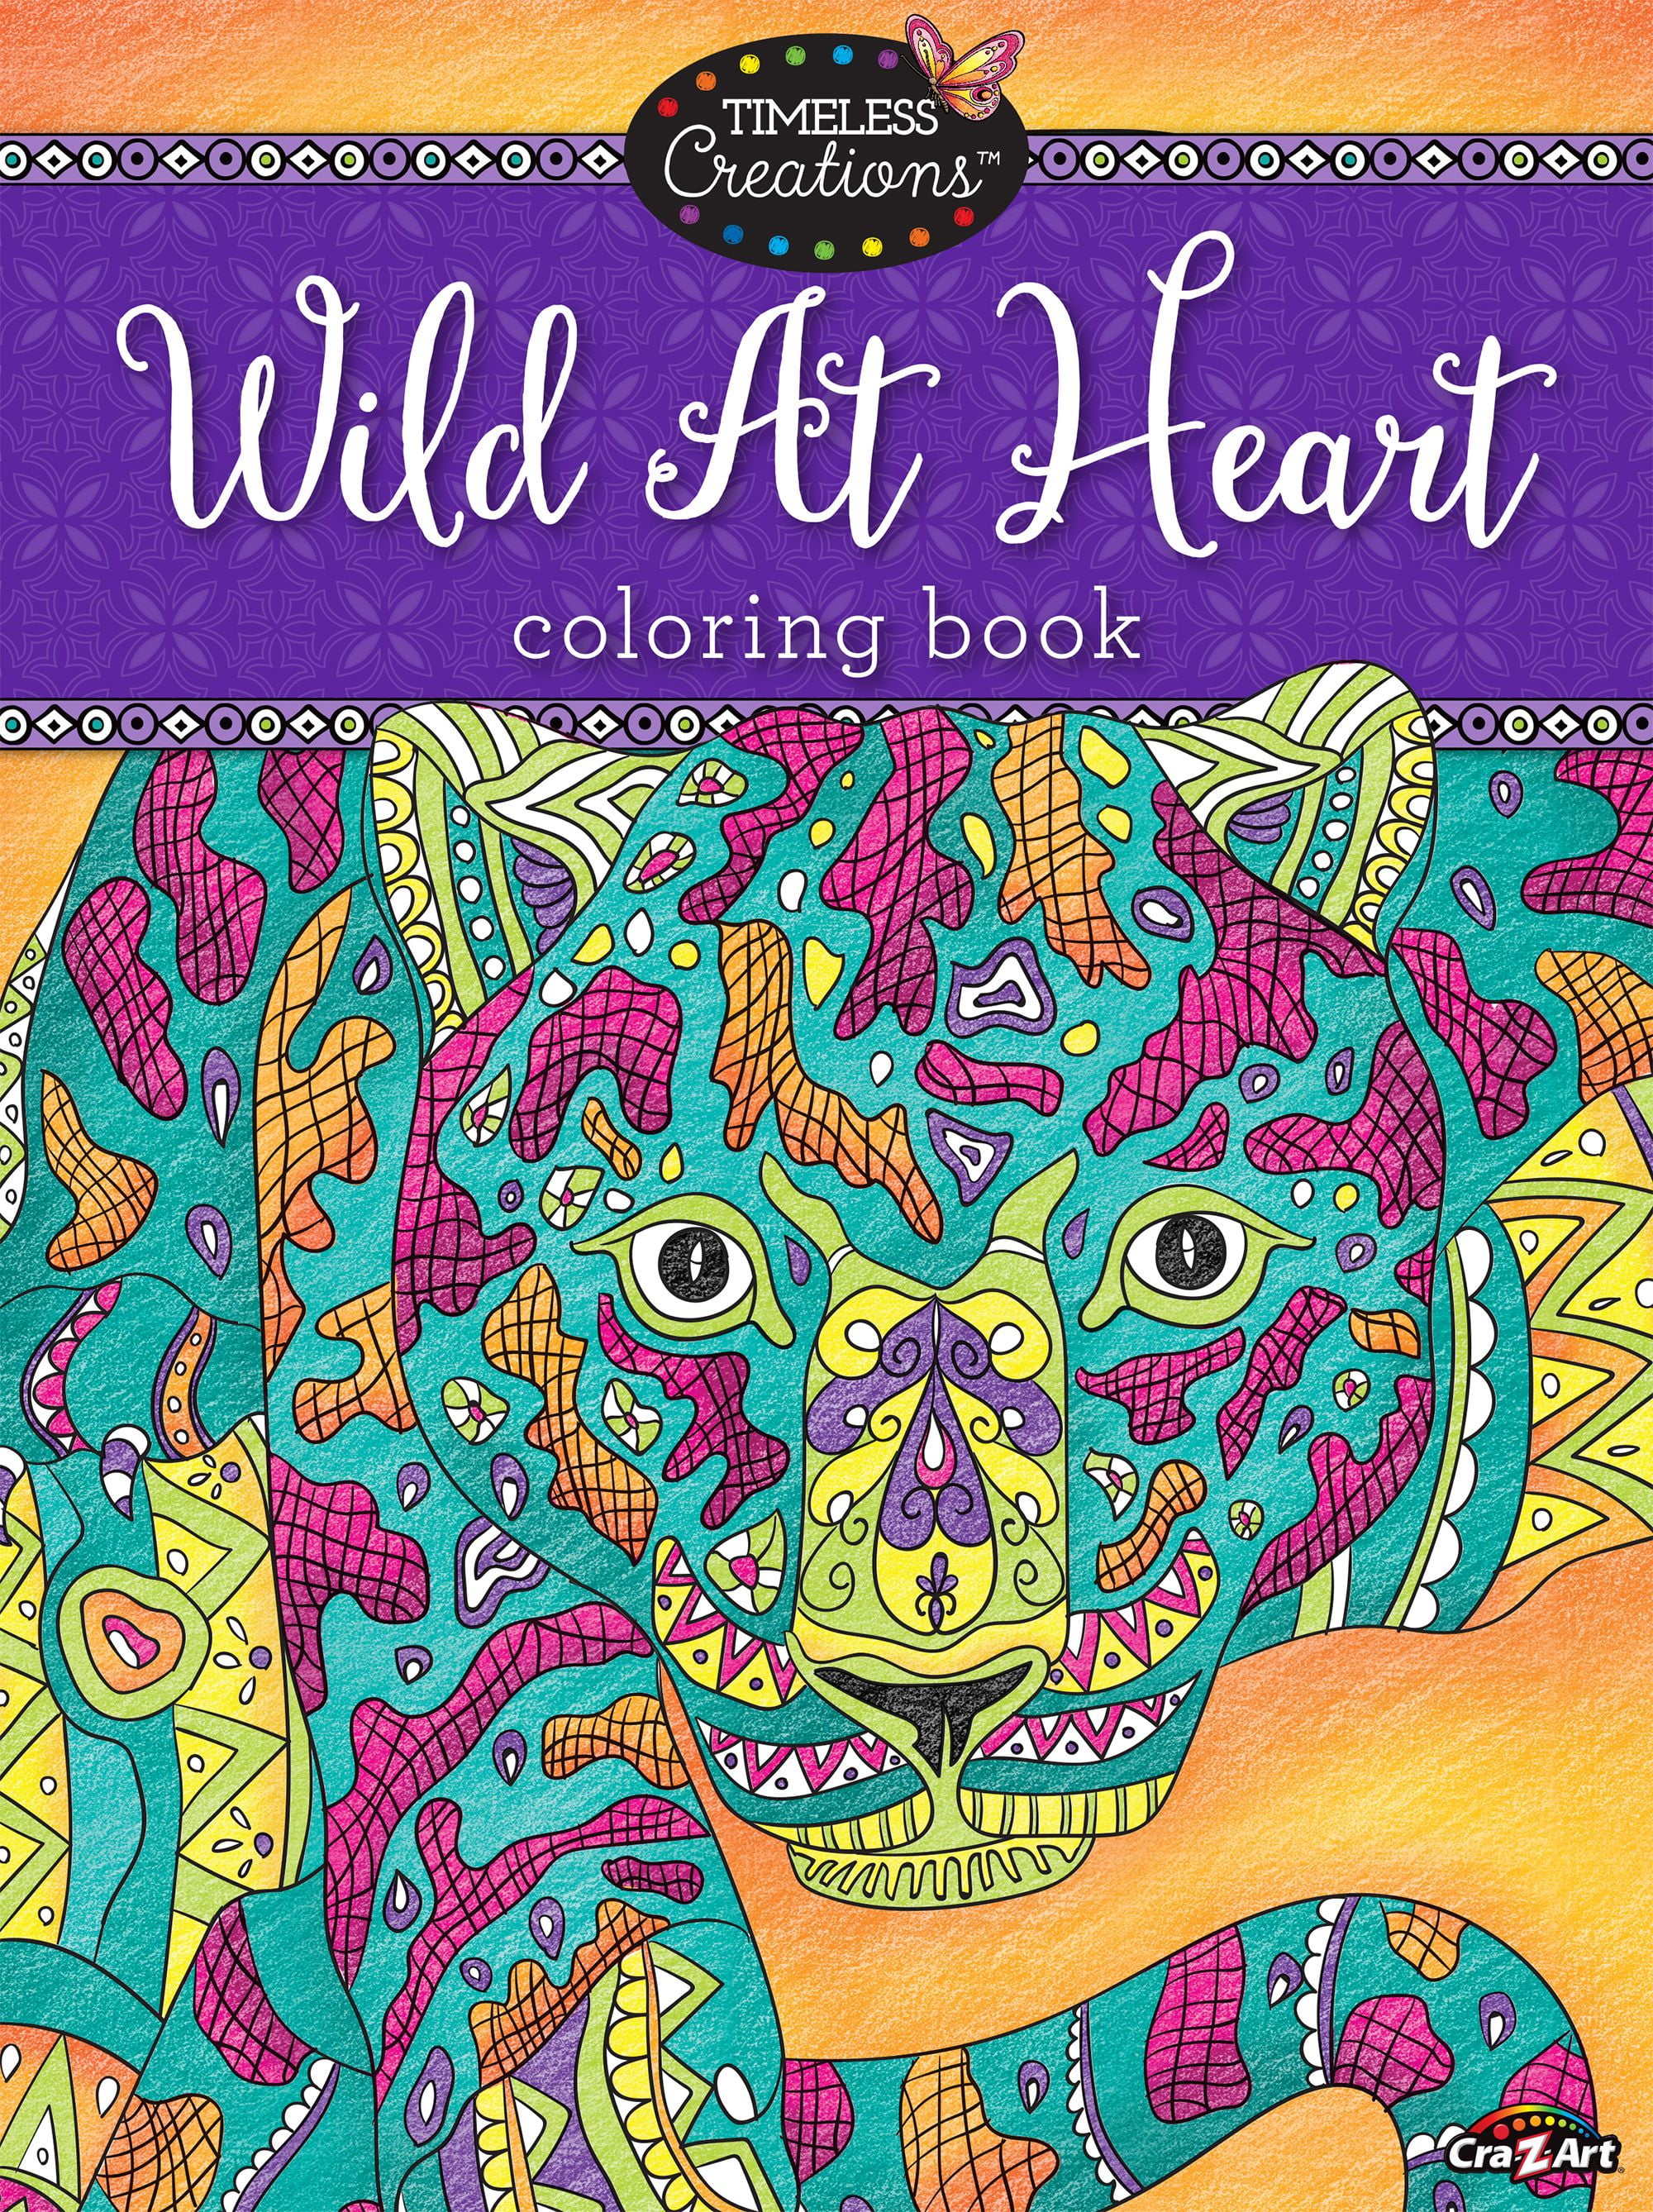 Cra-Z-Art’s Timeless Creations Adult Coloring Book, Wild at Heart, 64 Pages